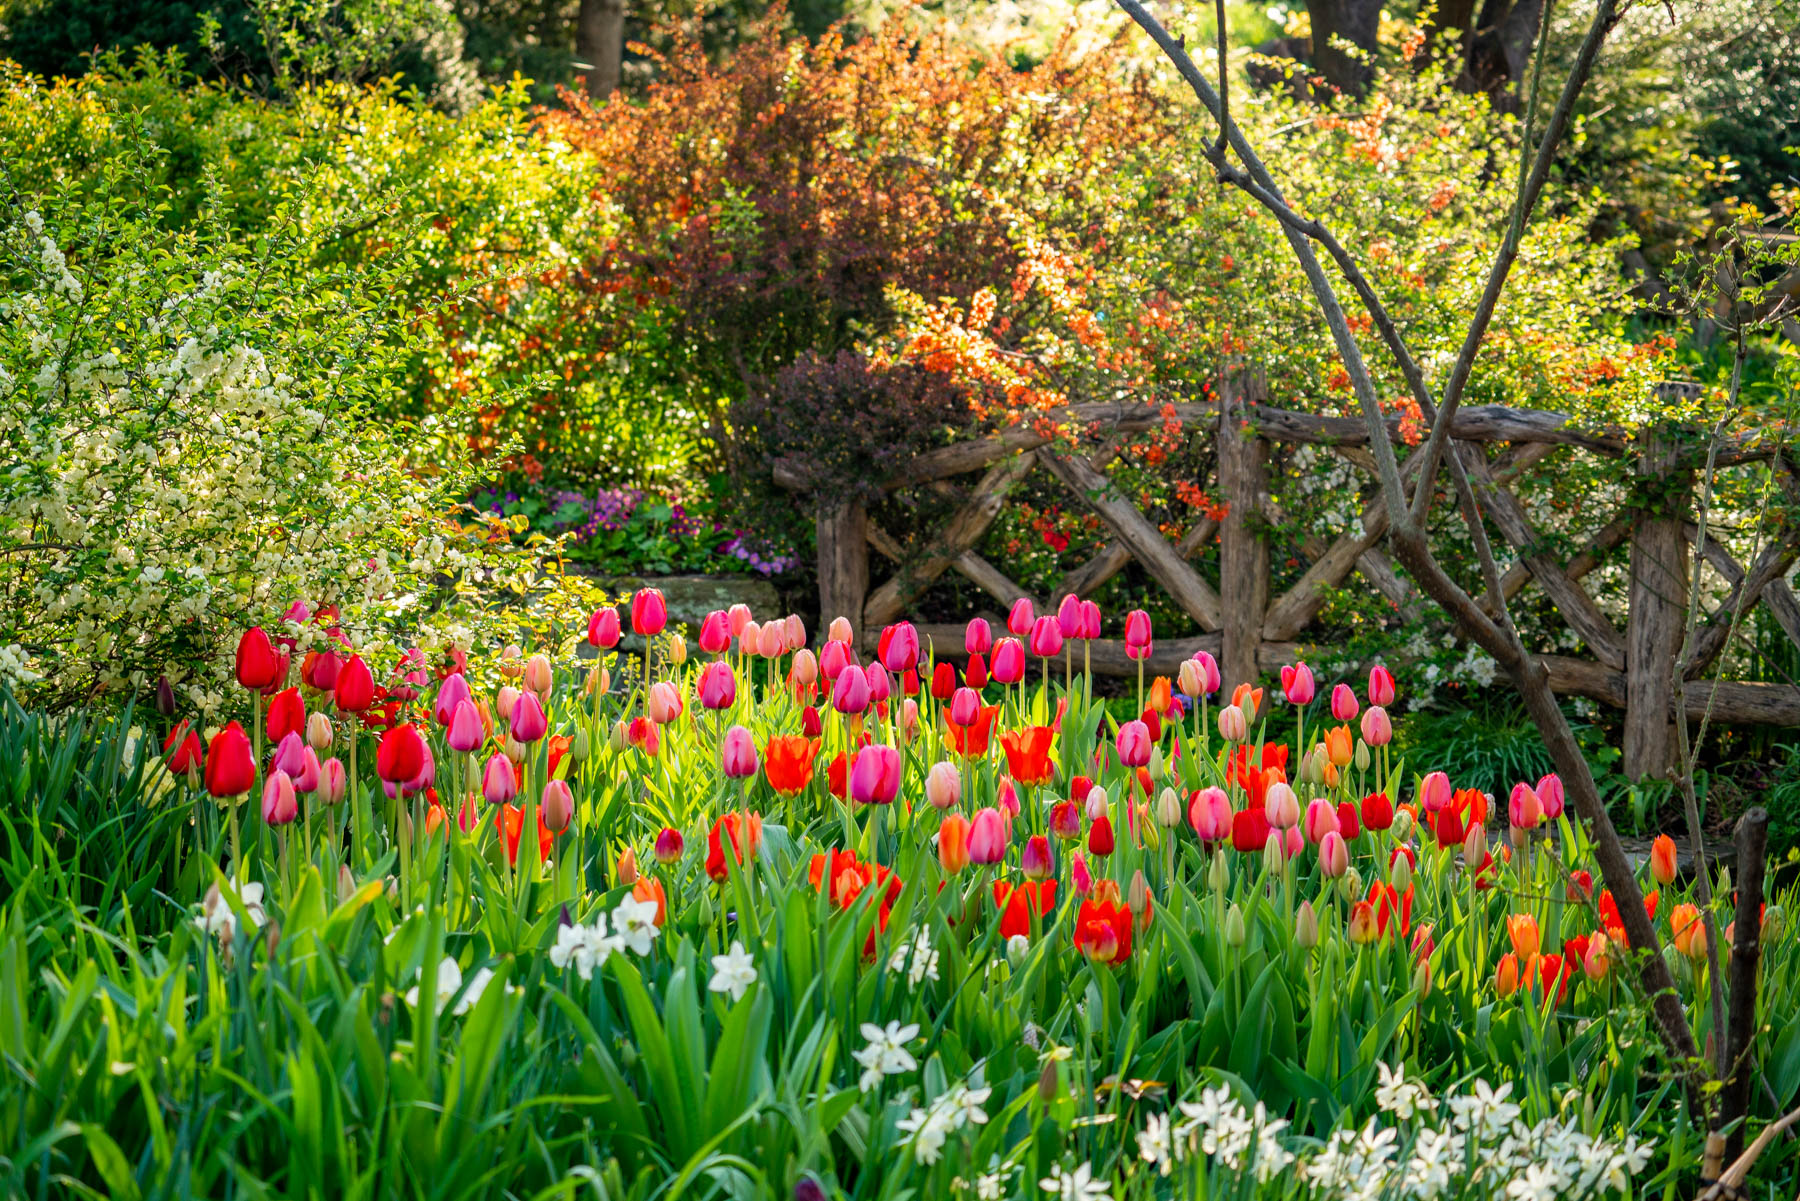 Central park tulips
Best spots for spring blooms New York City